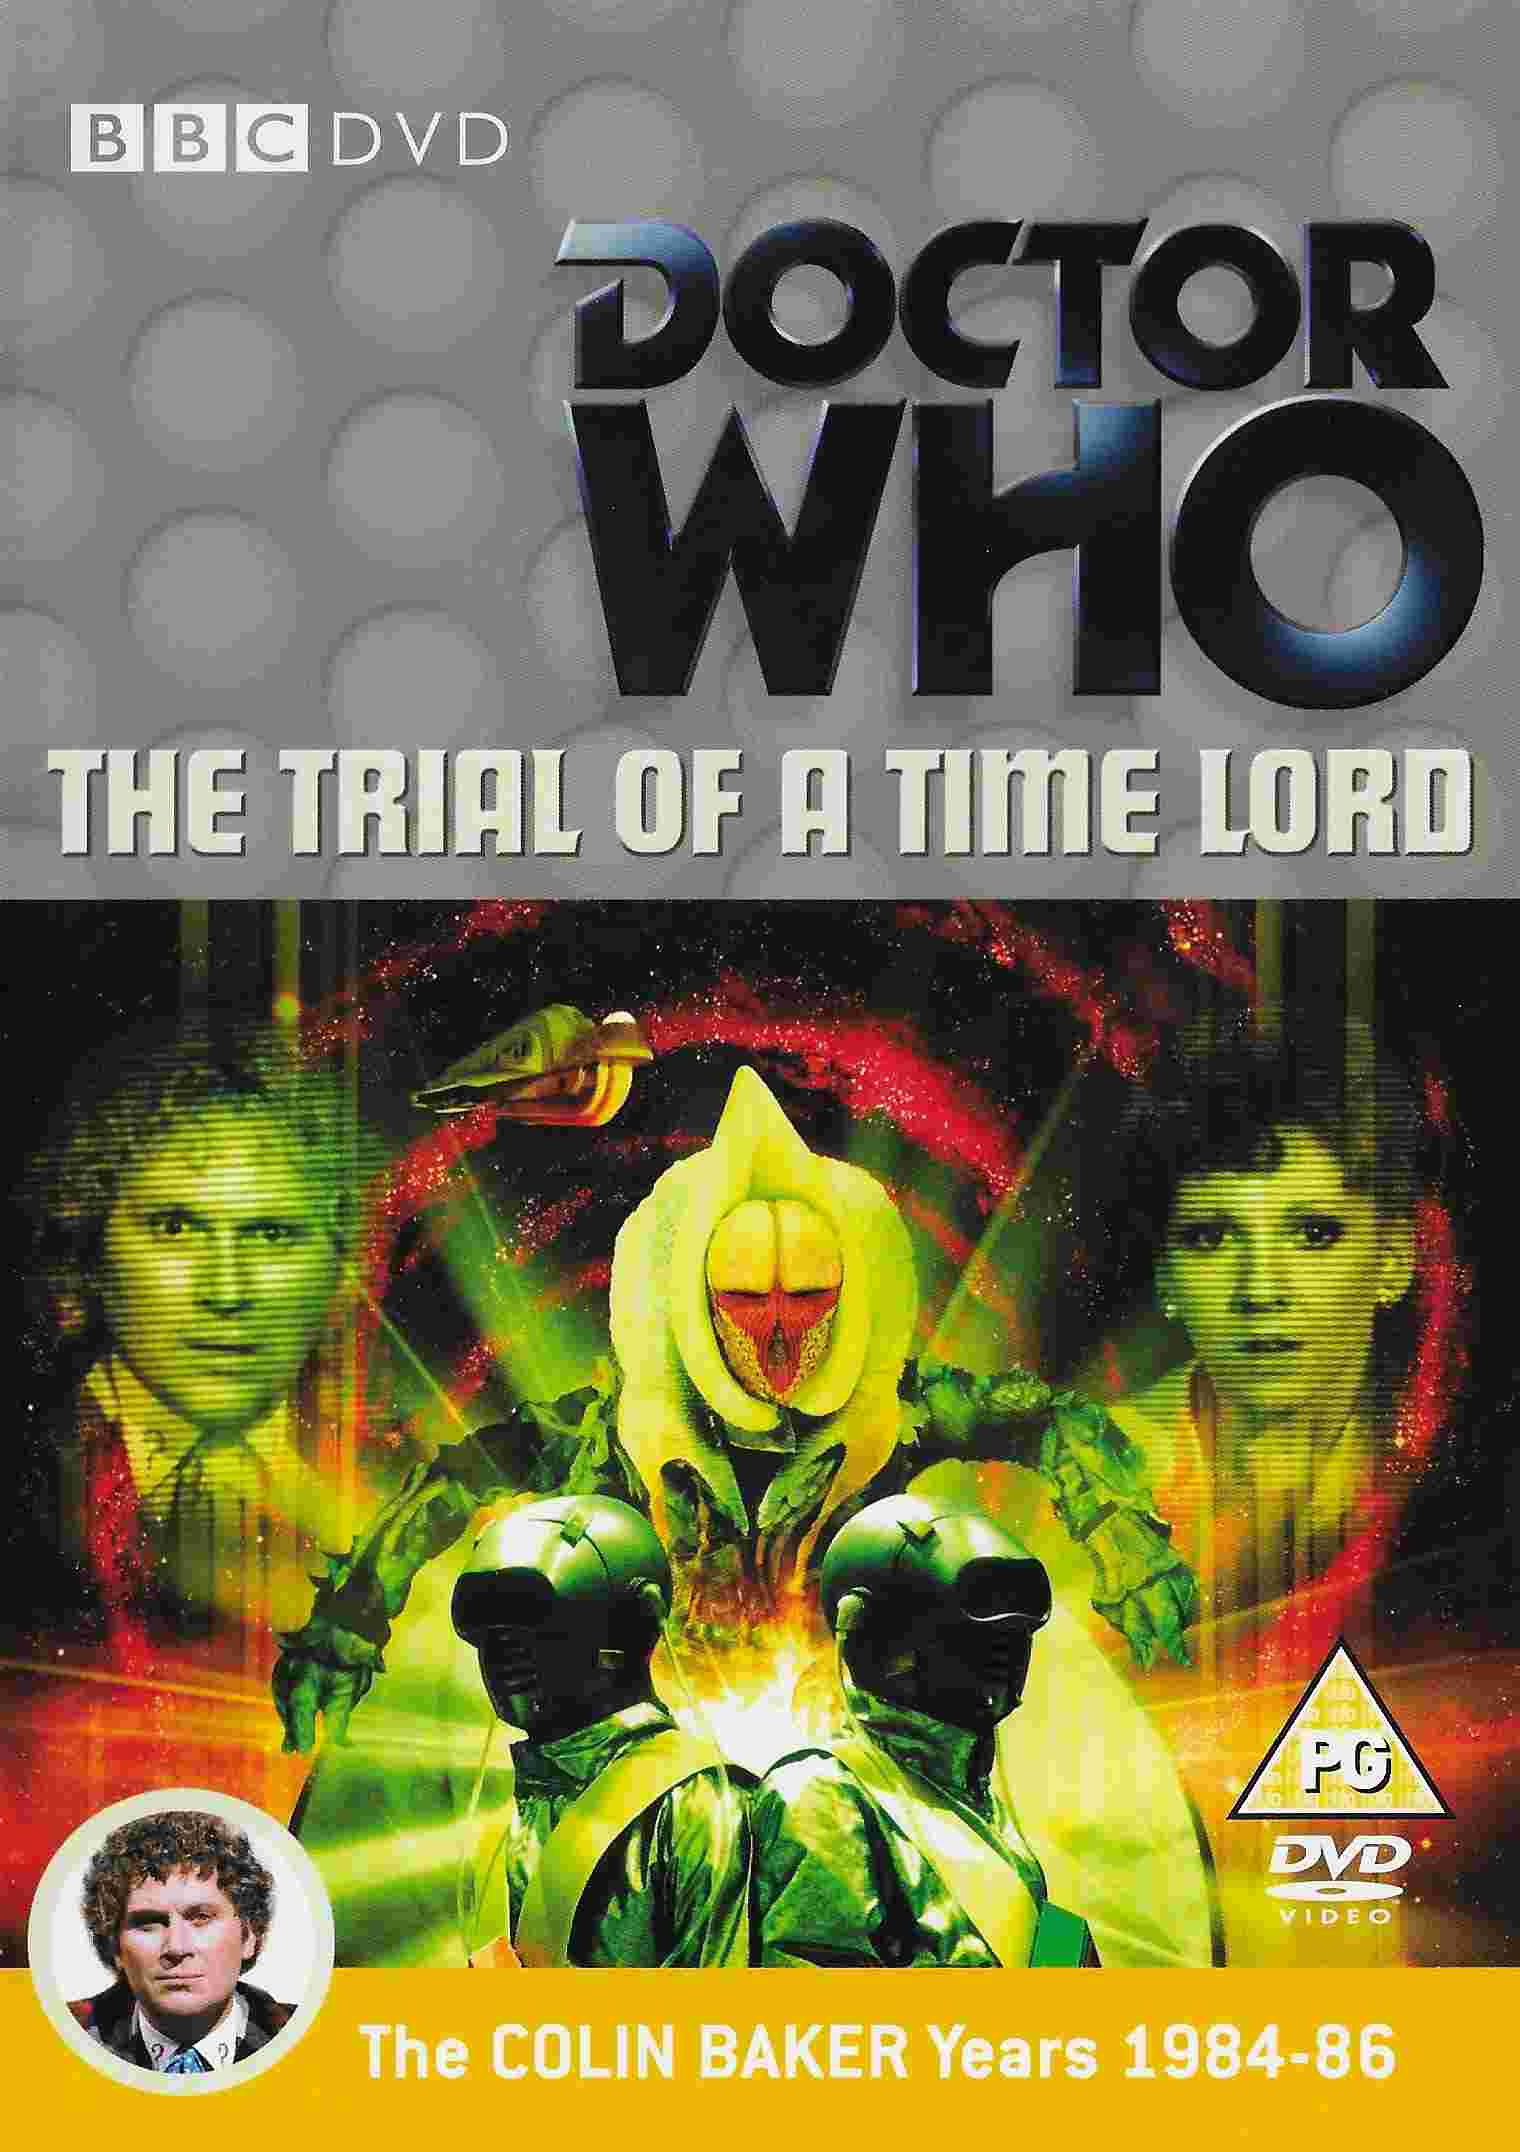 Picture of BBCDVD 2422C Doctor Who - The trial of a Time Lord - Parts 9-12 - Terror Of The Vervoids by artist Pip and Jane Baker from the BBC dvds - Records and Tapes library